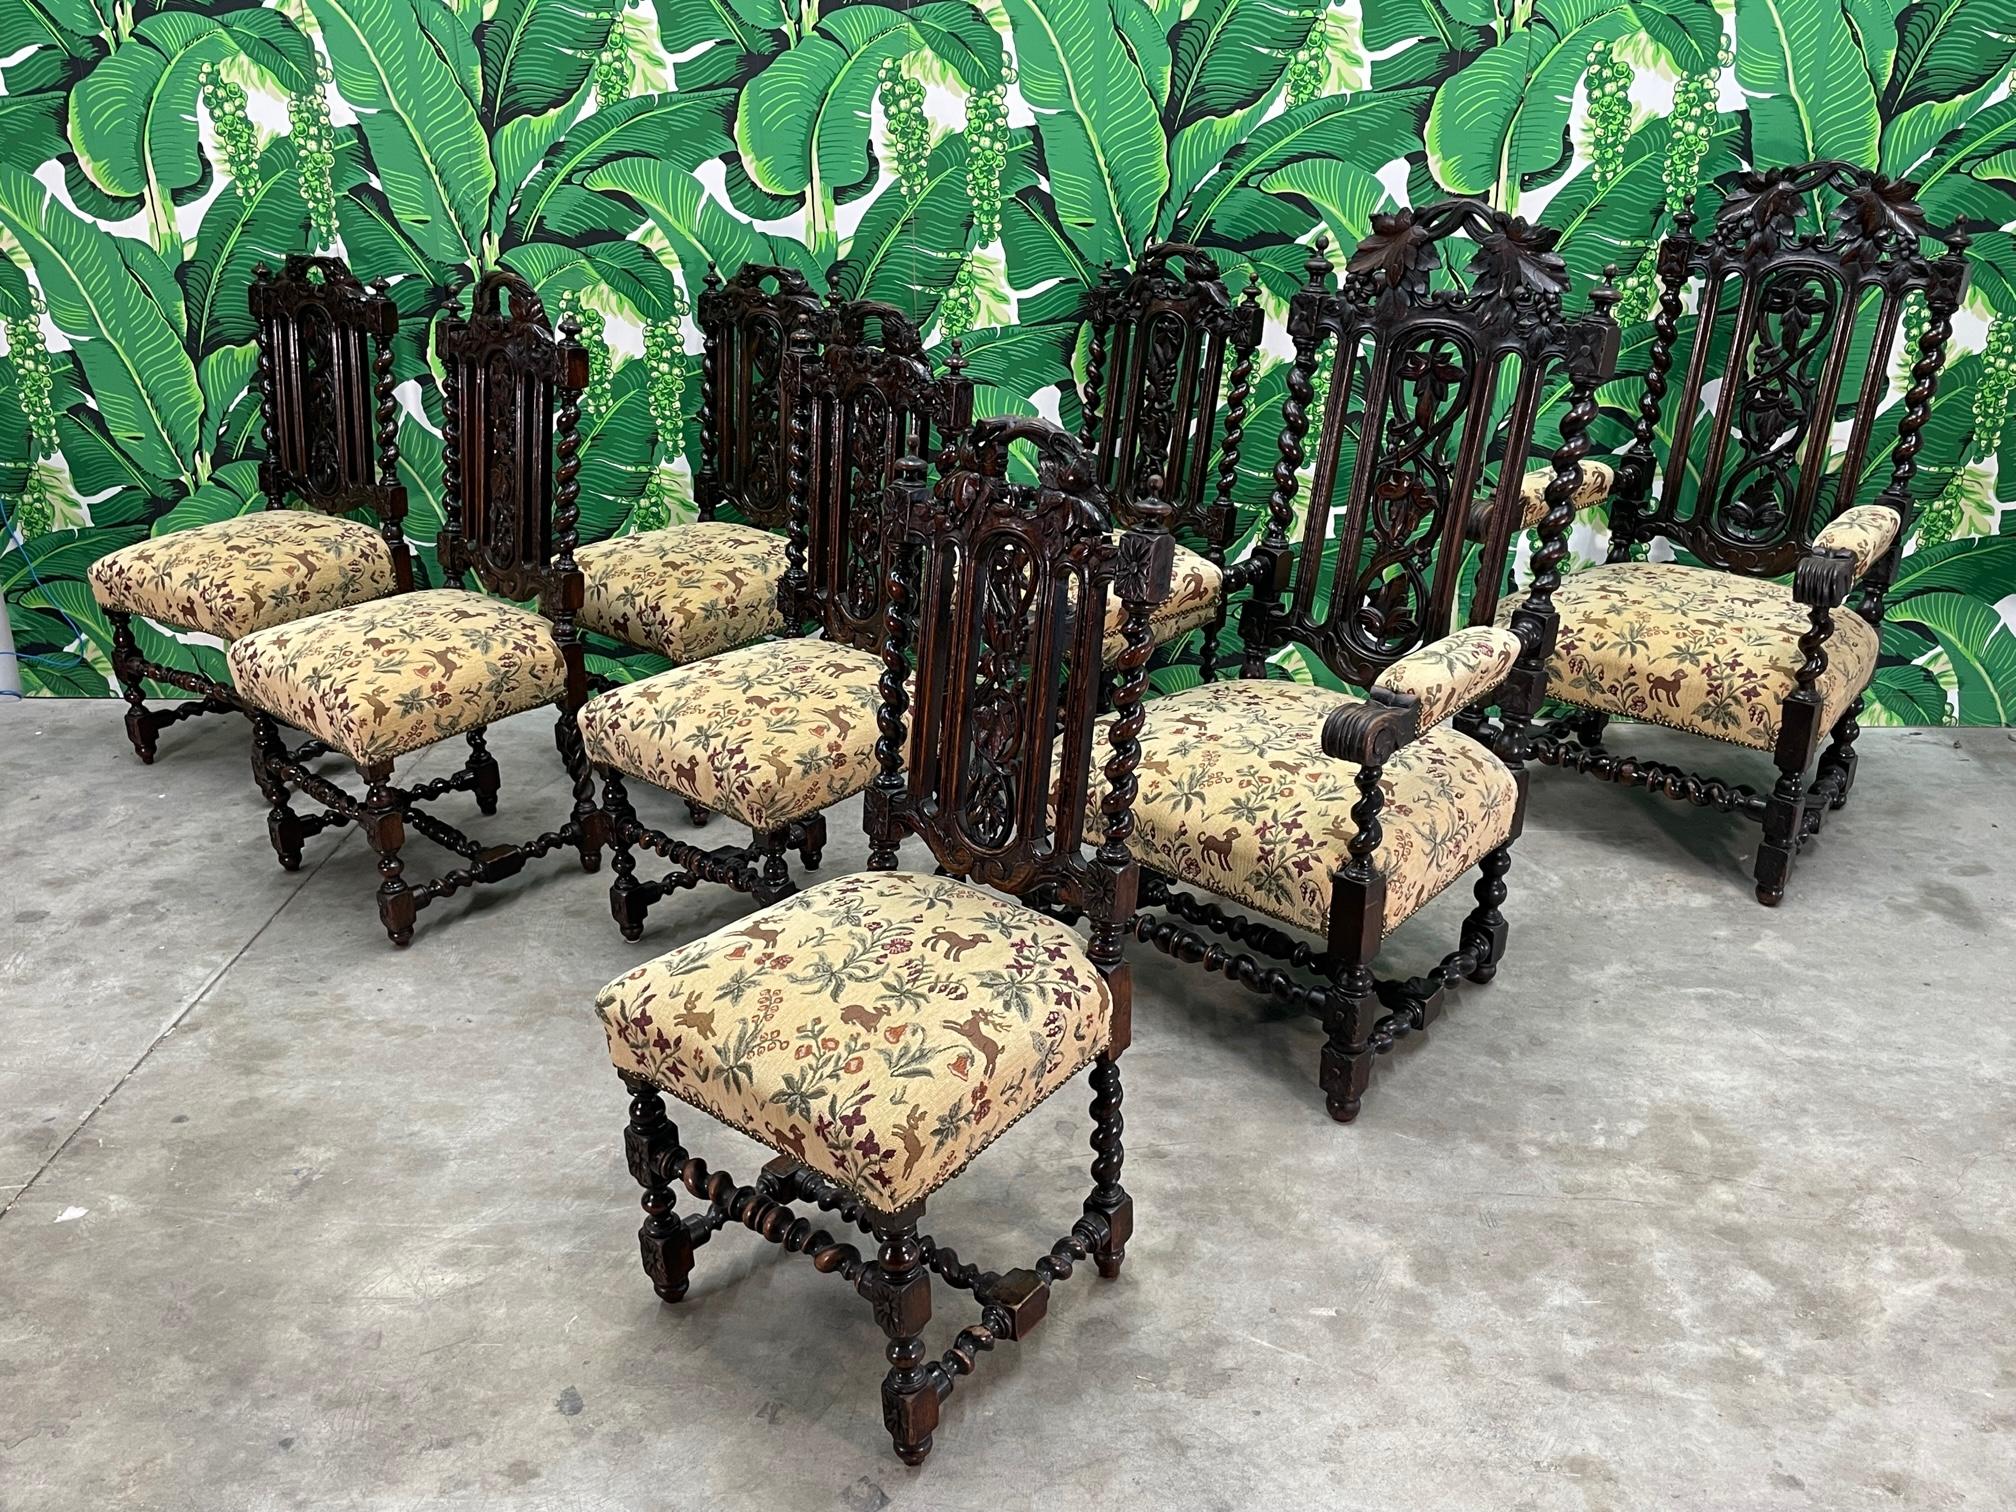 Set of 8 hand carved dining chairs in a Spanish Colonial style feature pierced carved backs in a foliate motif and Solomonic legs, stretchers, and back supports. Original finish and recently reupholstered. Very heavy and structurally sound. Some